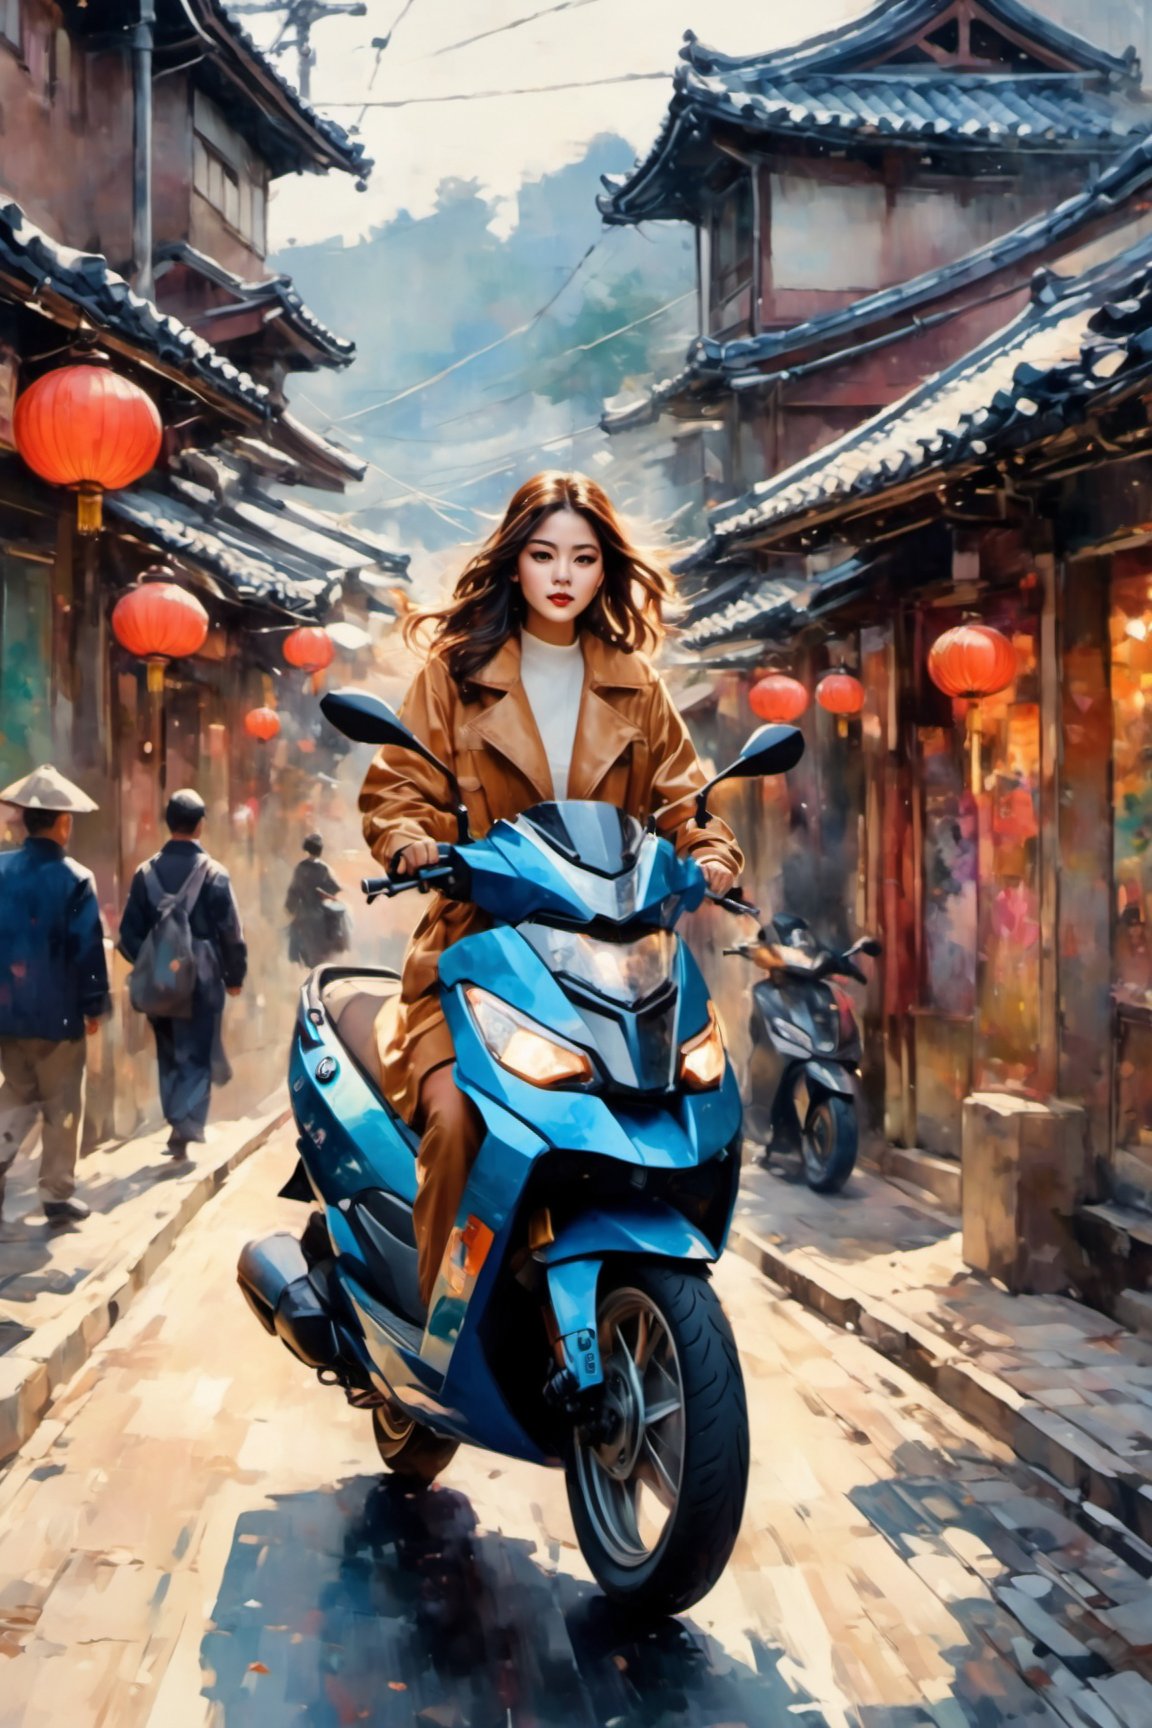 Painting in the style of prismatic portraits, beautiful landscapes, hyperrealistic precision, digital art techniques, impressionist: dappled light, bold, colorful portraits, wide angle. A young Korean K-pop star rides a BMW C400X scooter through the narrow streets of a Japanese old town. High nose bridge, doe eyes, sharp jawline, plump lips, and an hourglass figure. T-dress and black tights. Soft lighting wraps around her face, accentuating every curve and crease. Cluttered maximalism. Womancore. Mote Kei. Extremely high-resolution details.